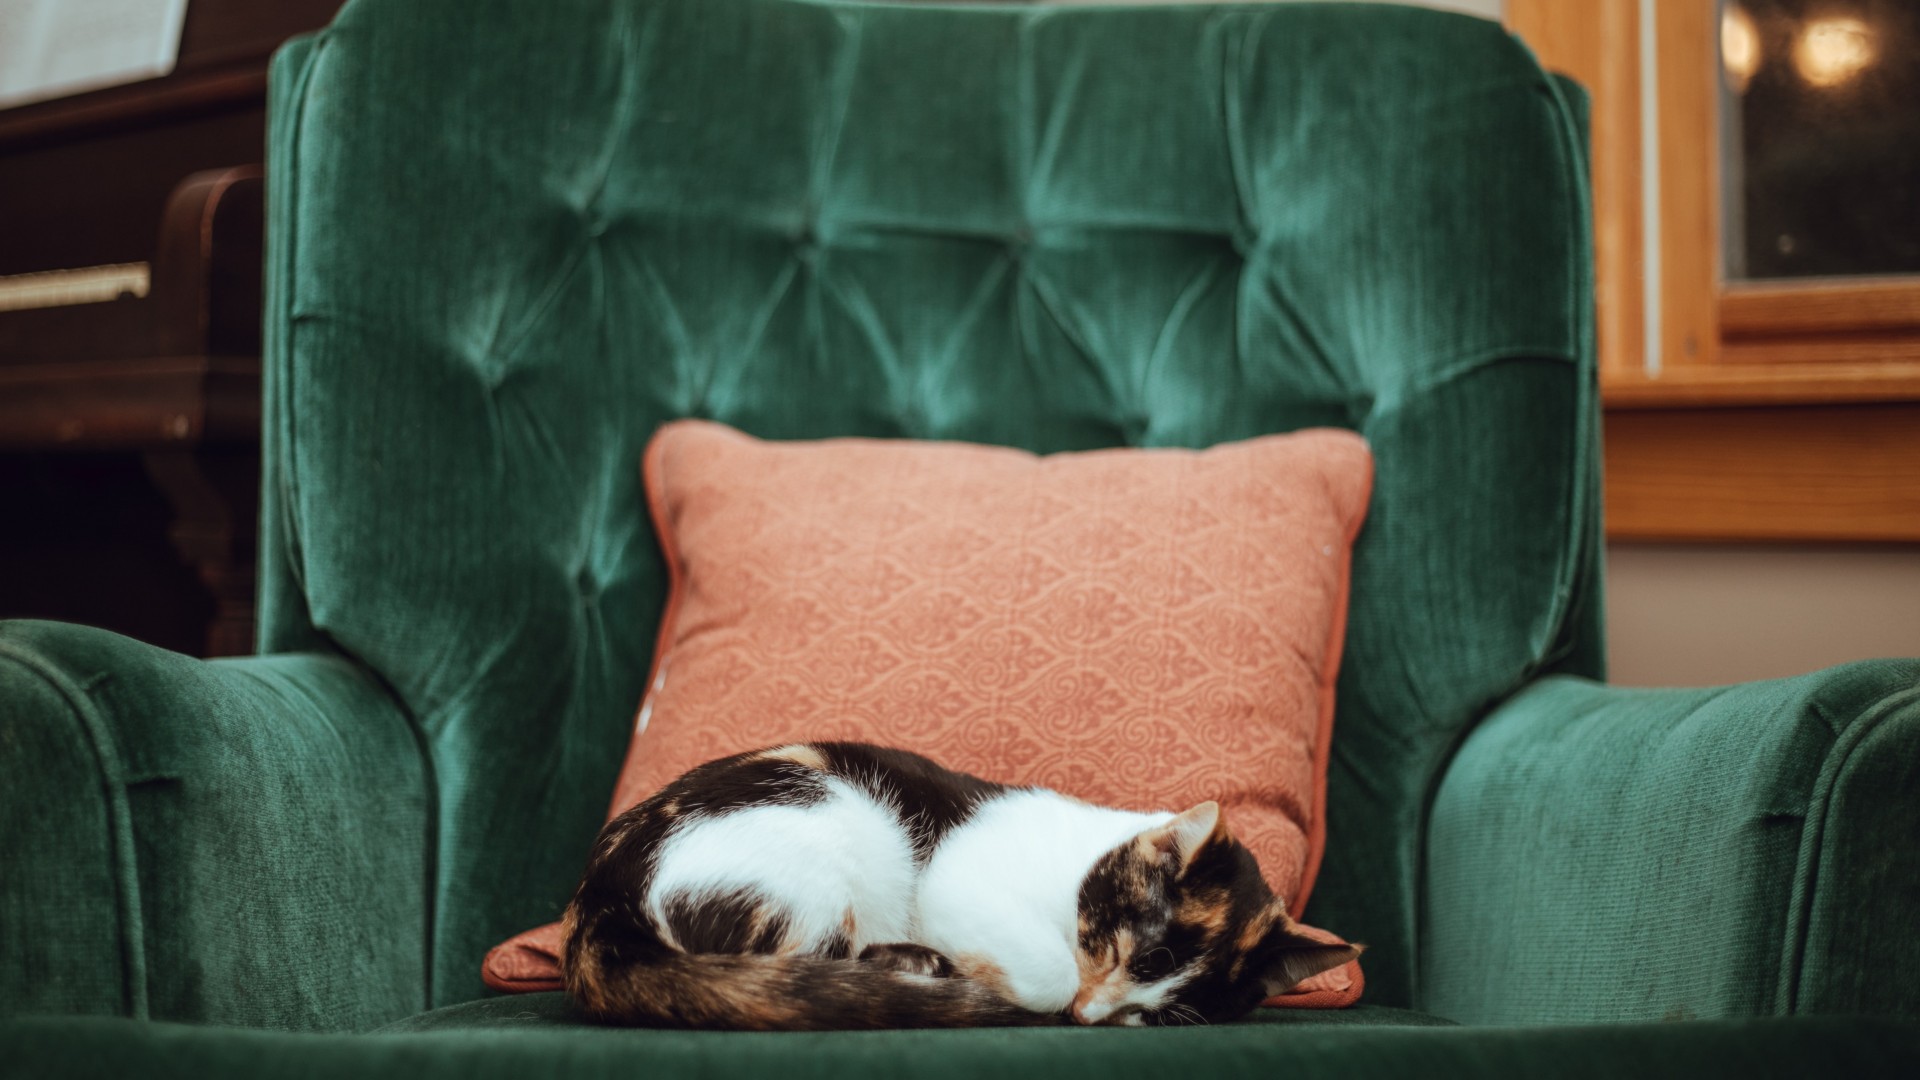 Cat snuggled in green chair; Photo by Tucker Good on Unsplash